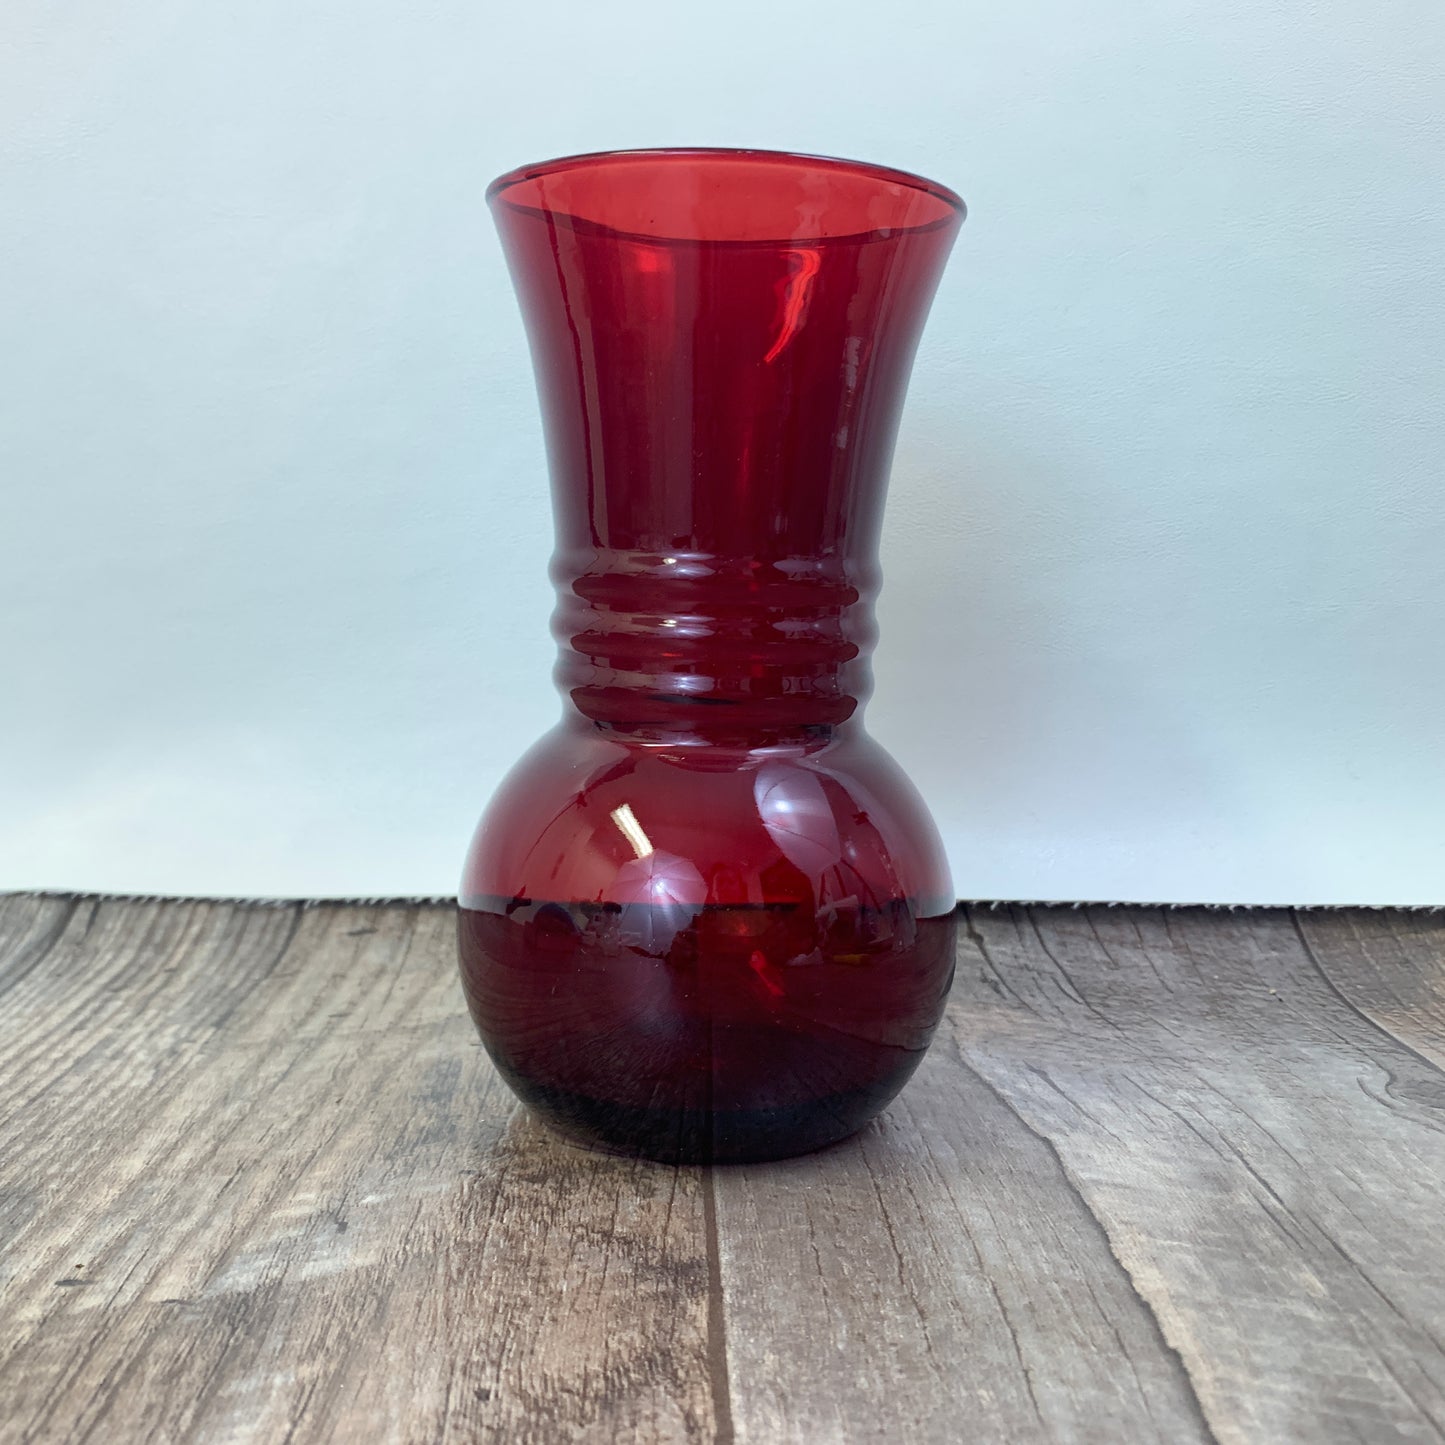 Ruby Red Pineapple Vase with Etched Design Ruby Red Glass Vase, Vintage Home Decor Small Red Vase, Vintage Housewarming Gifts